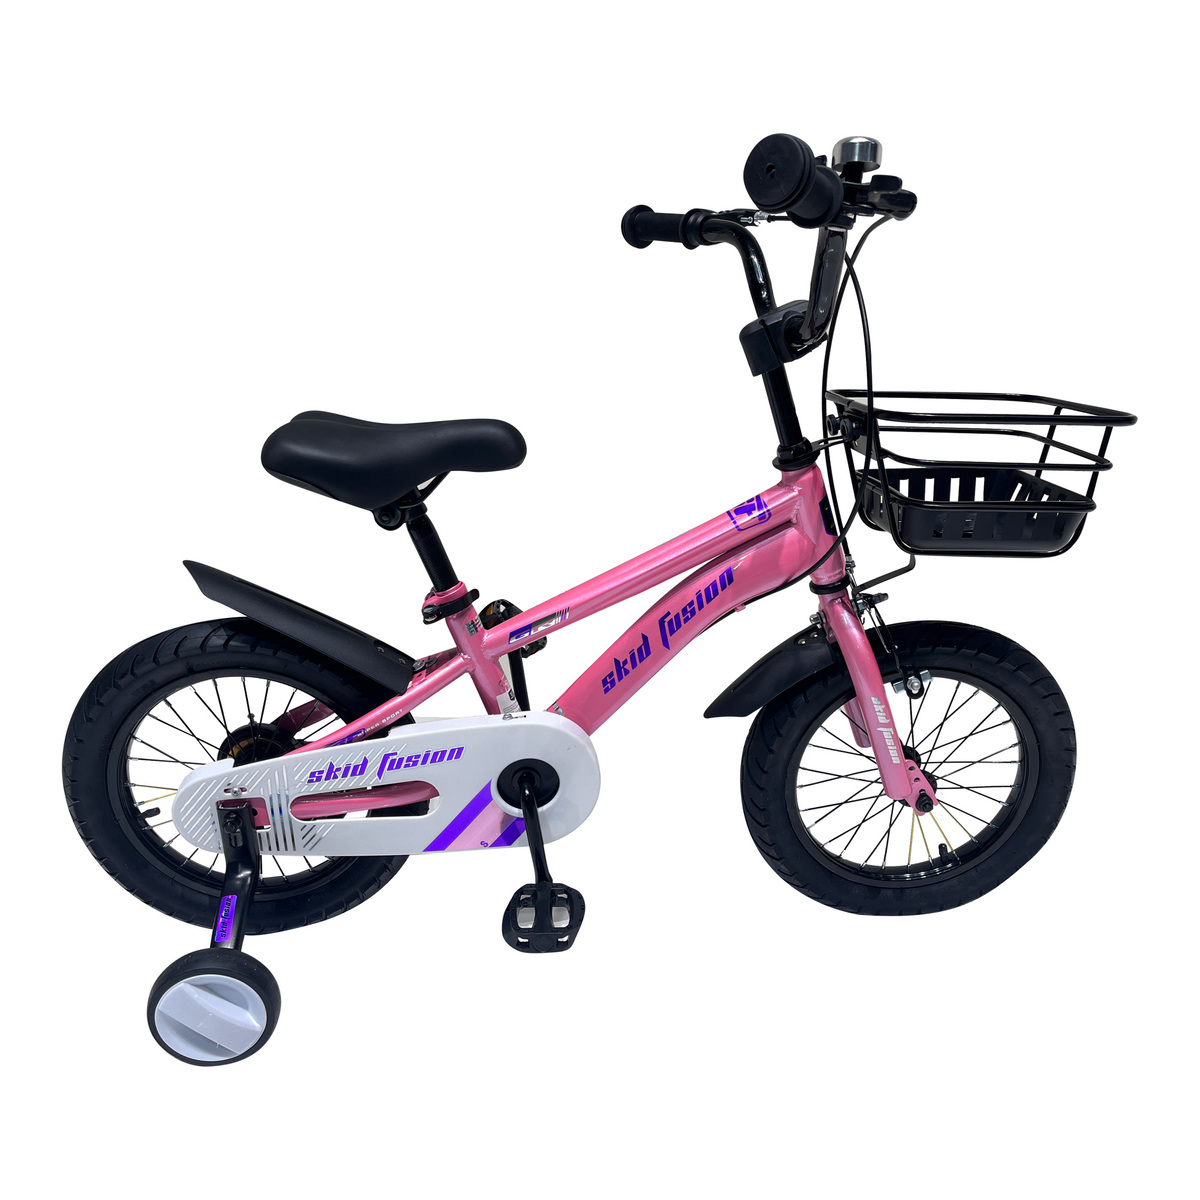 Skid Fusion Kids Bicycle 16" HT-16 Assorted Color